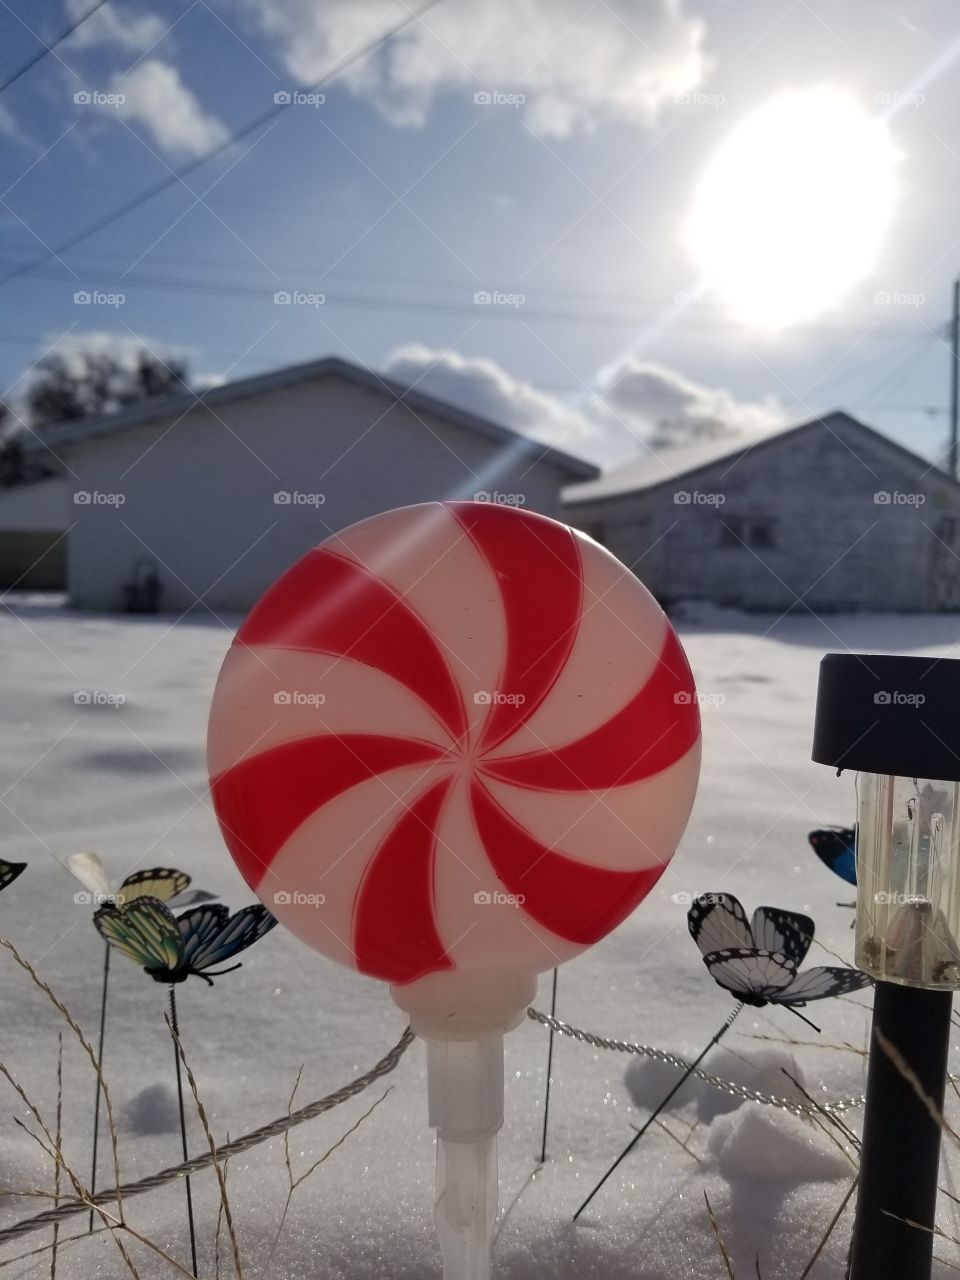 Candy decoration in the snow